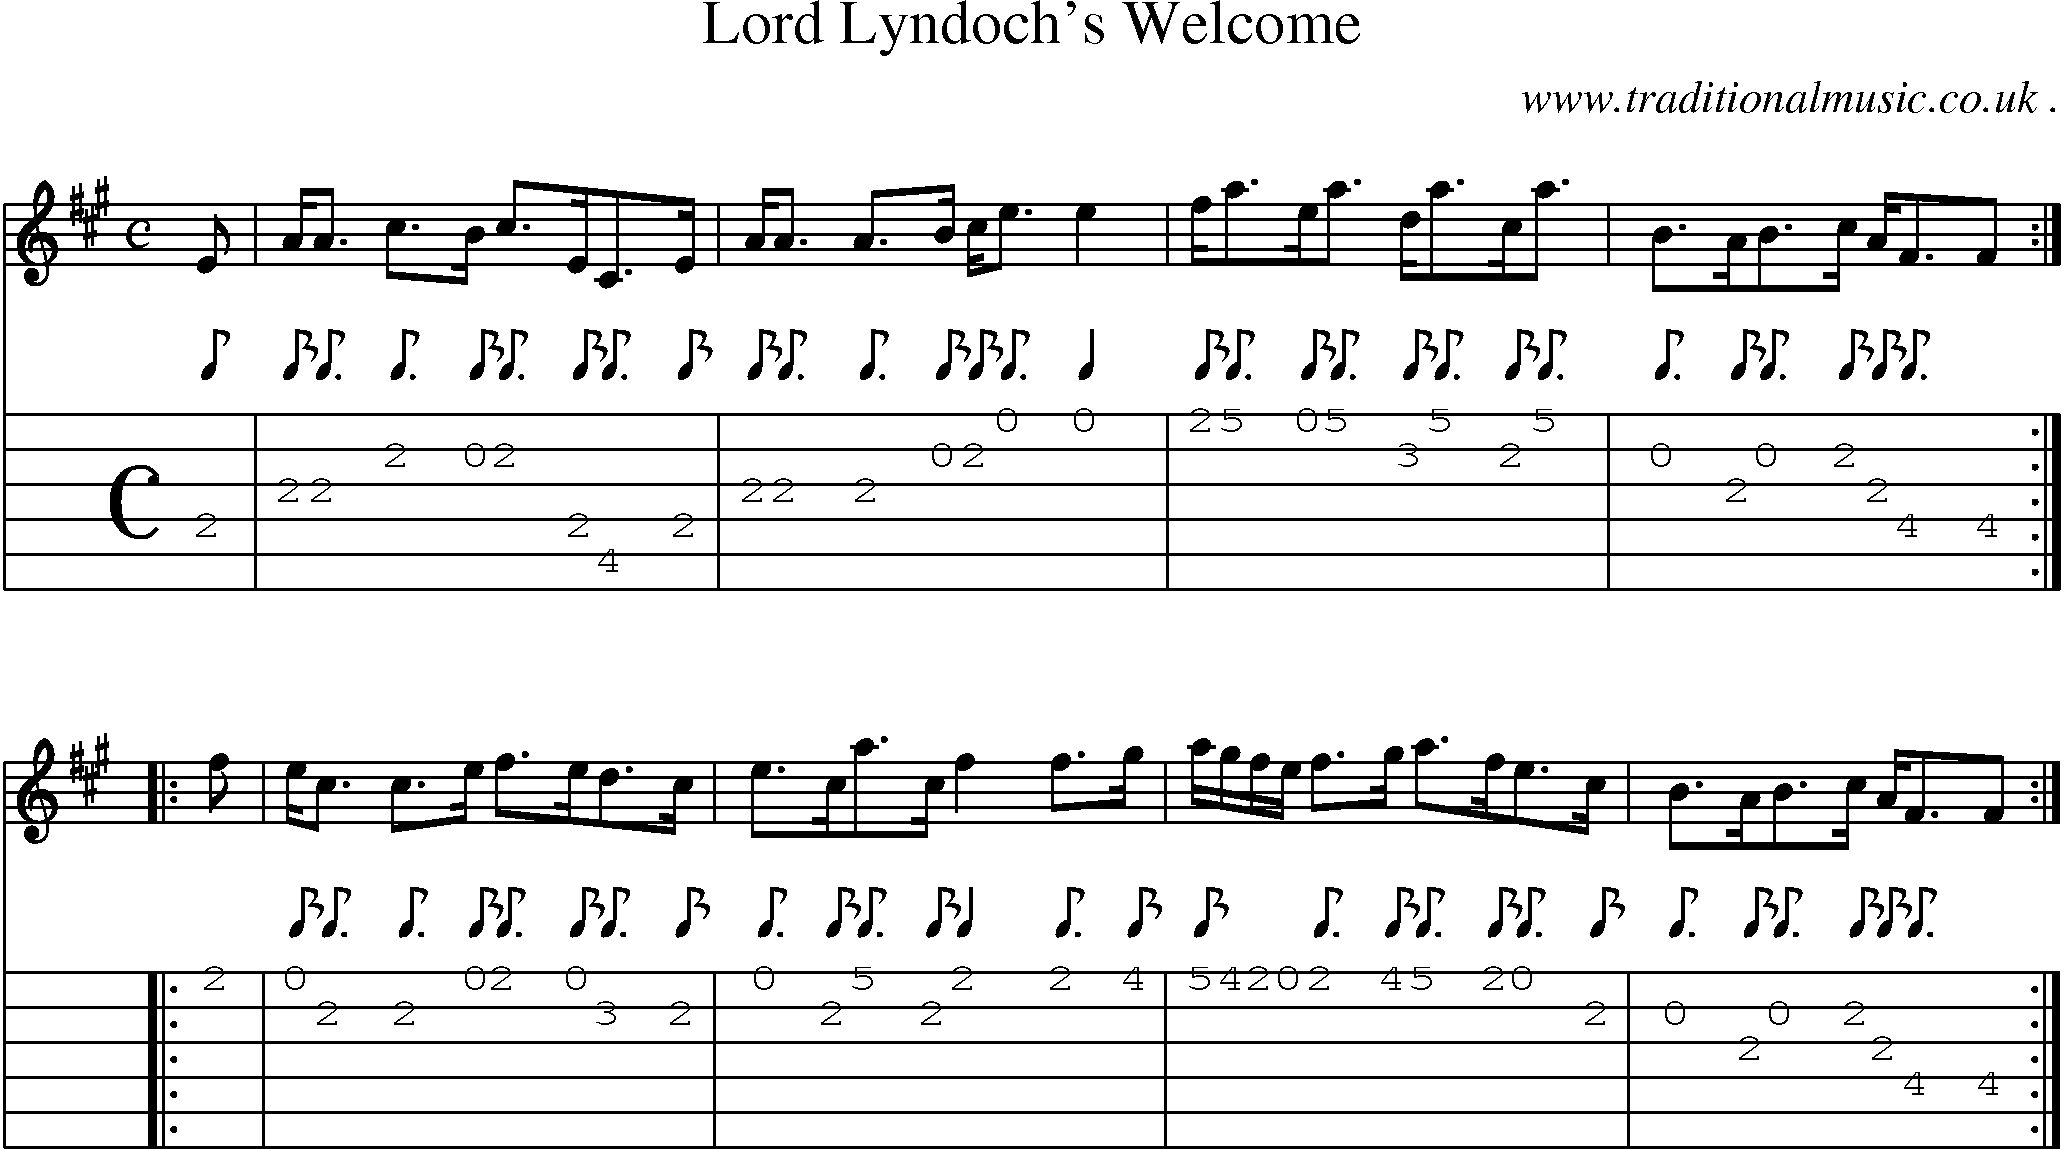 Sheet-music  score, Chords and Guitar Tabs for Lord Lyndochs Welcome